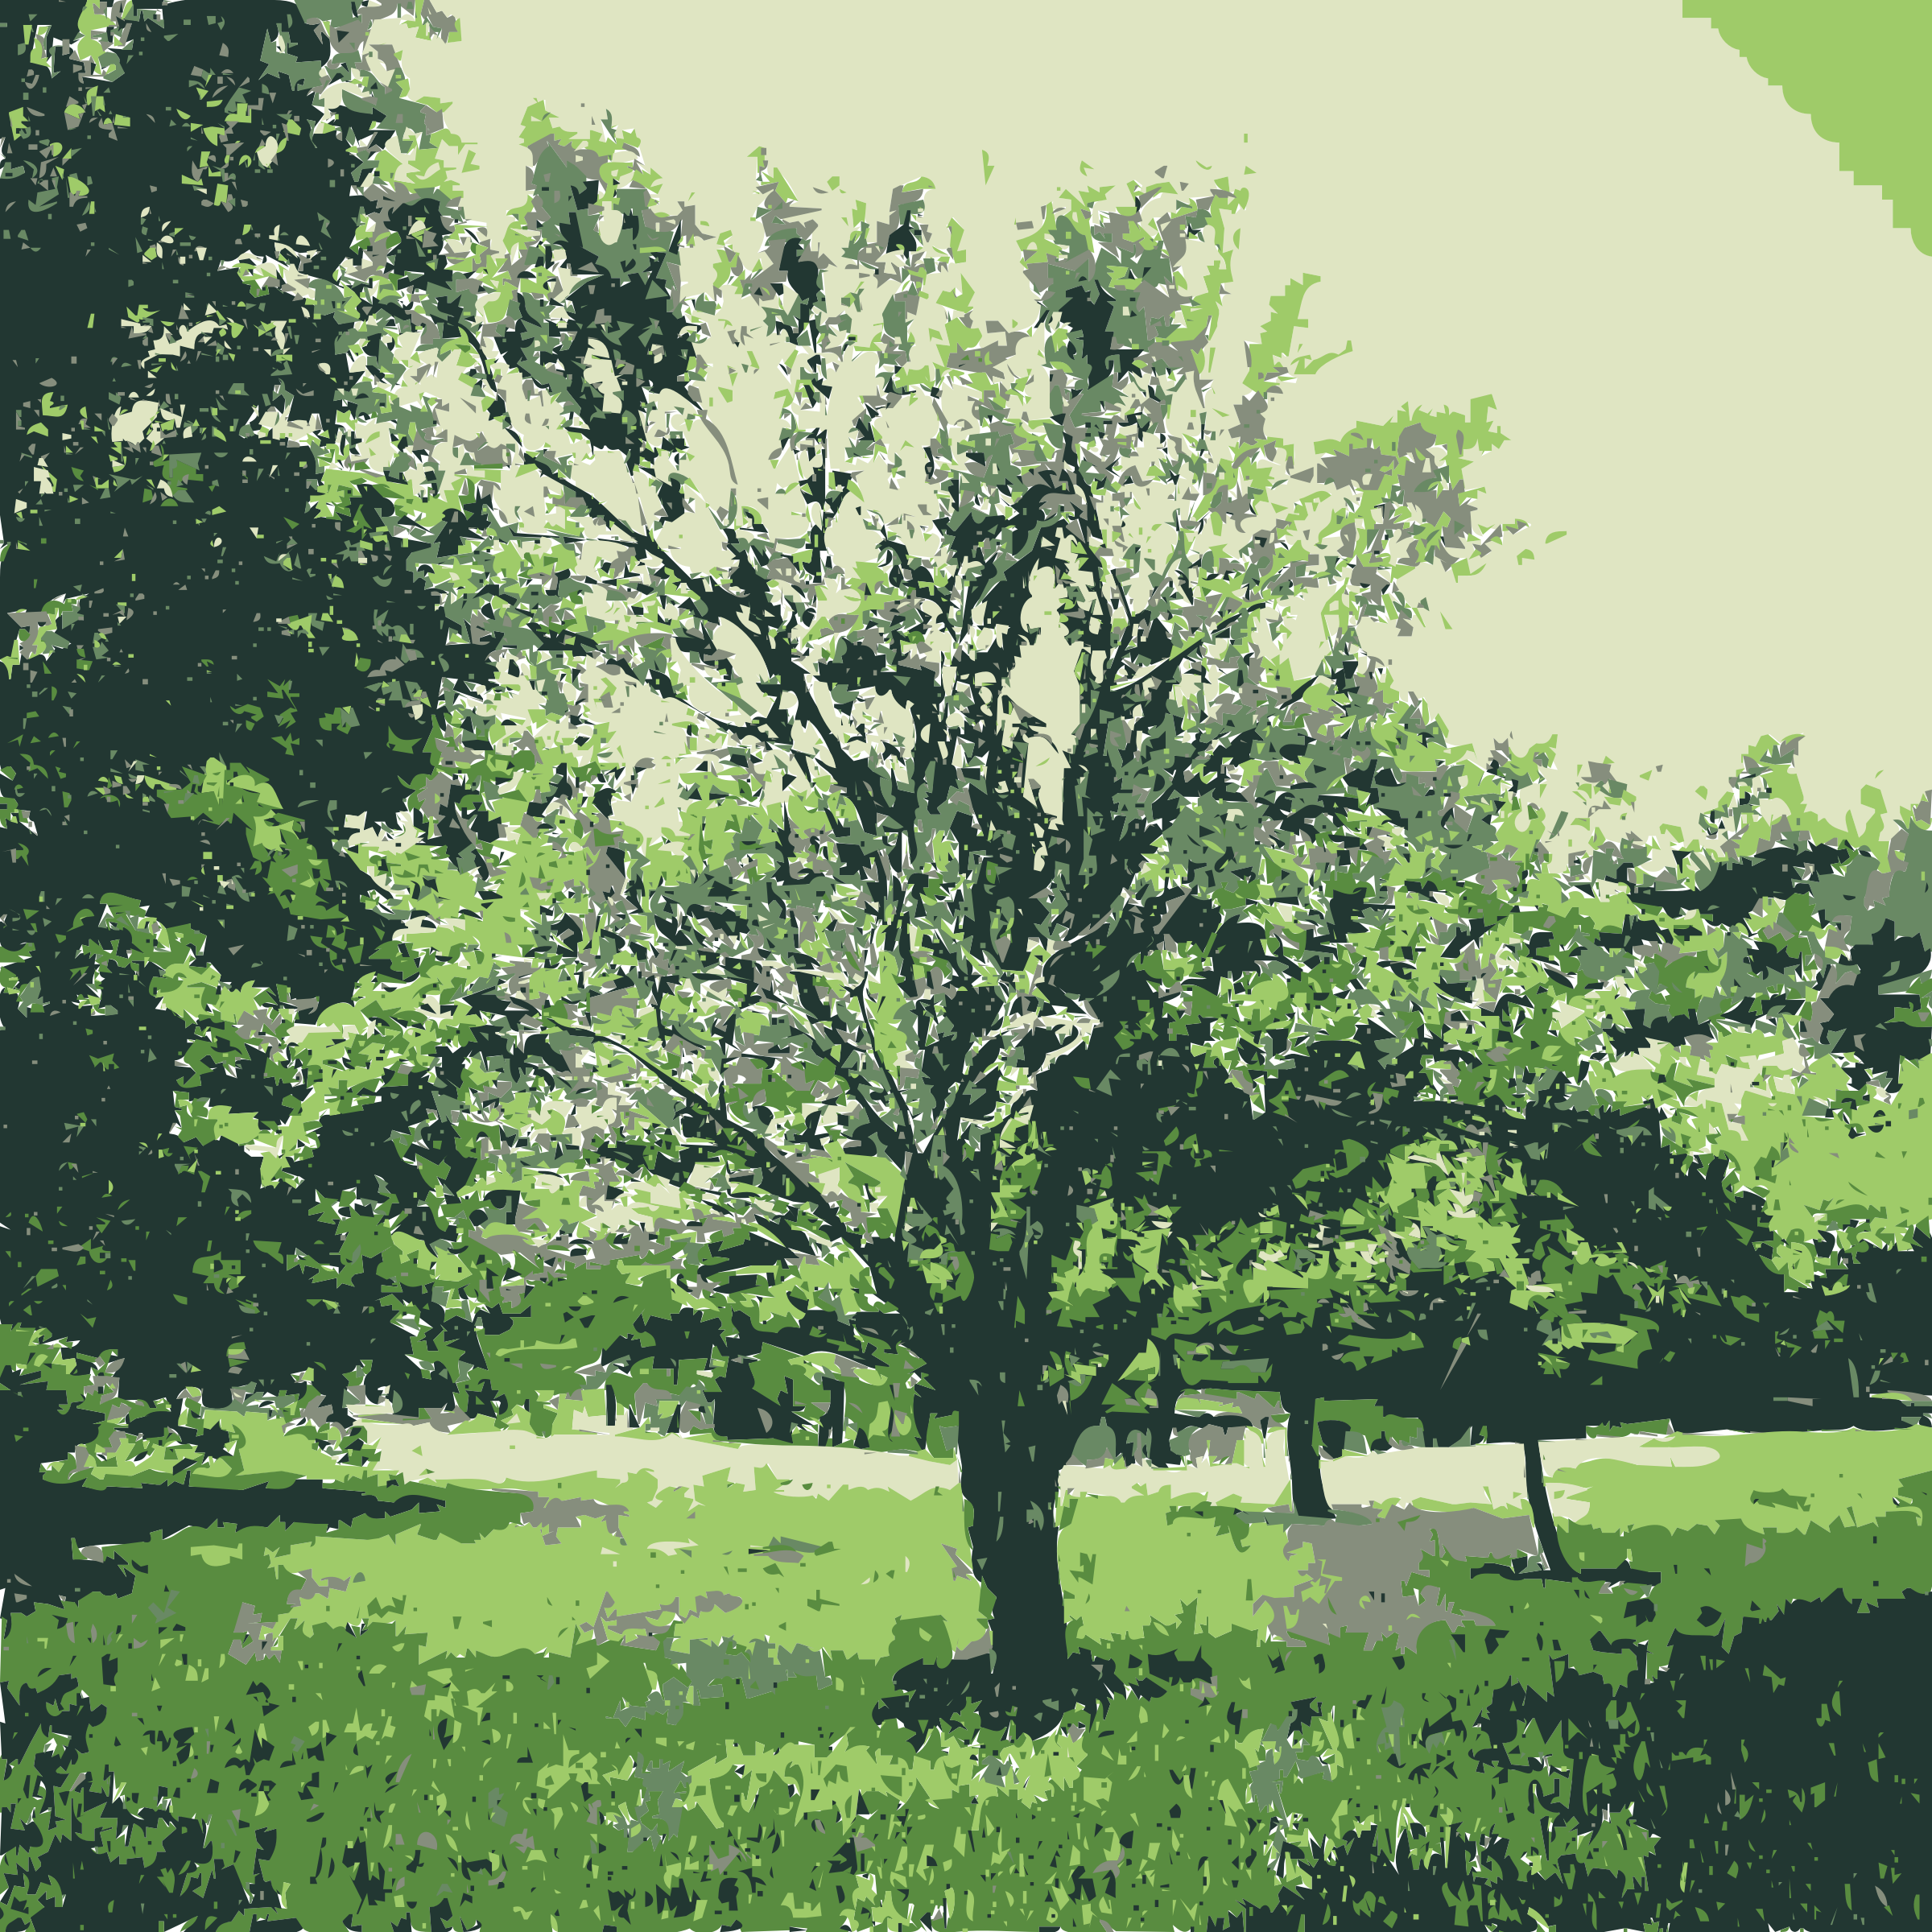 nature clipart green nature